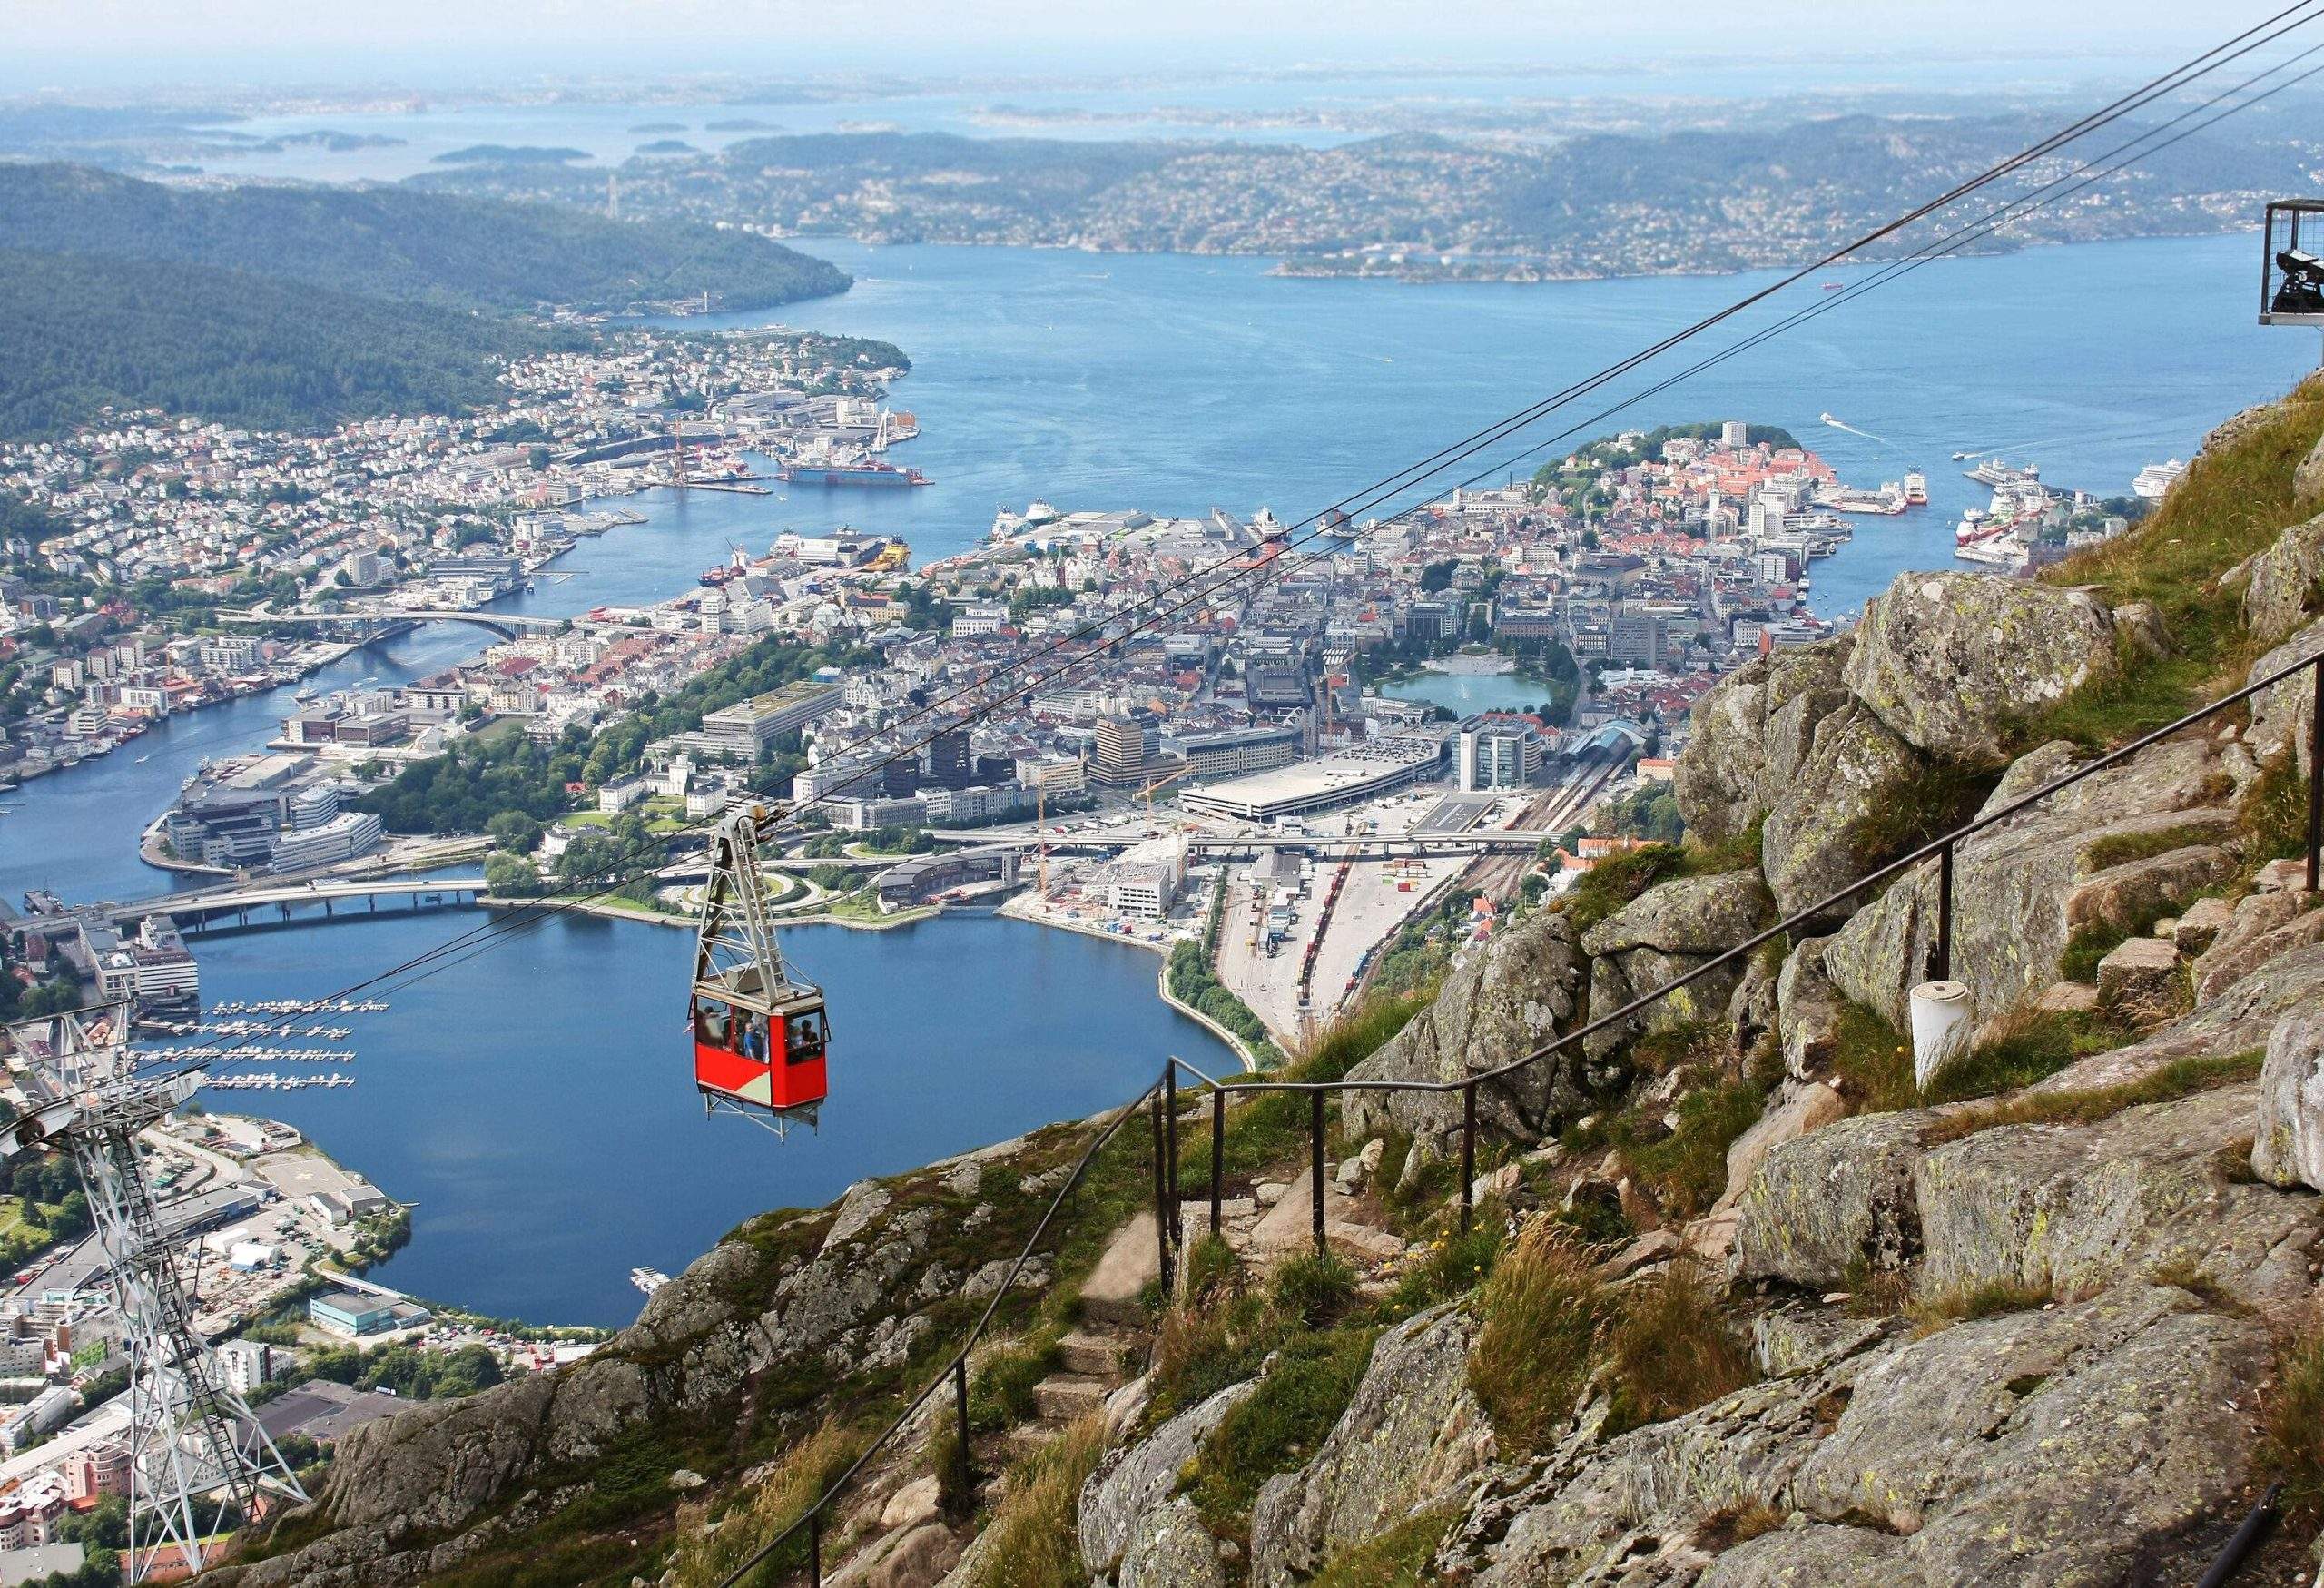 A red cable car traversing a ropeway with incredible views of the sea and the surrounding towns.